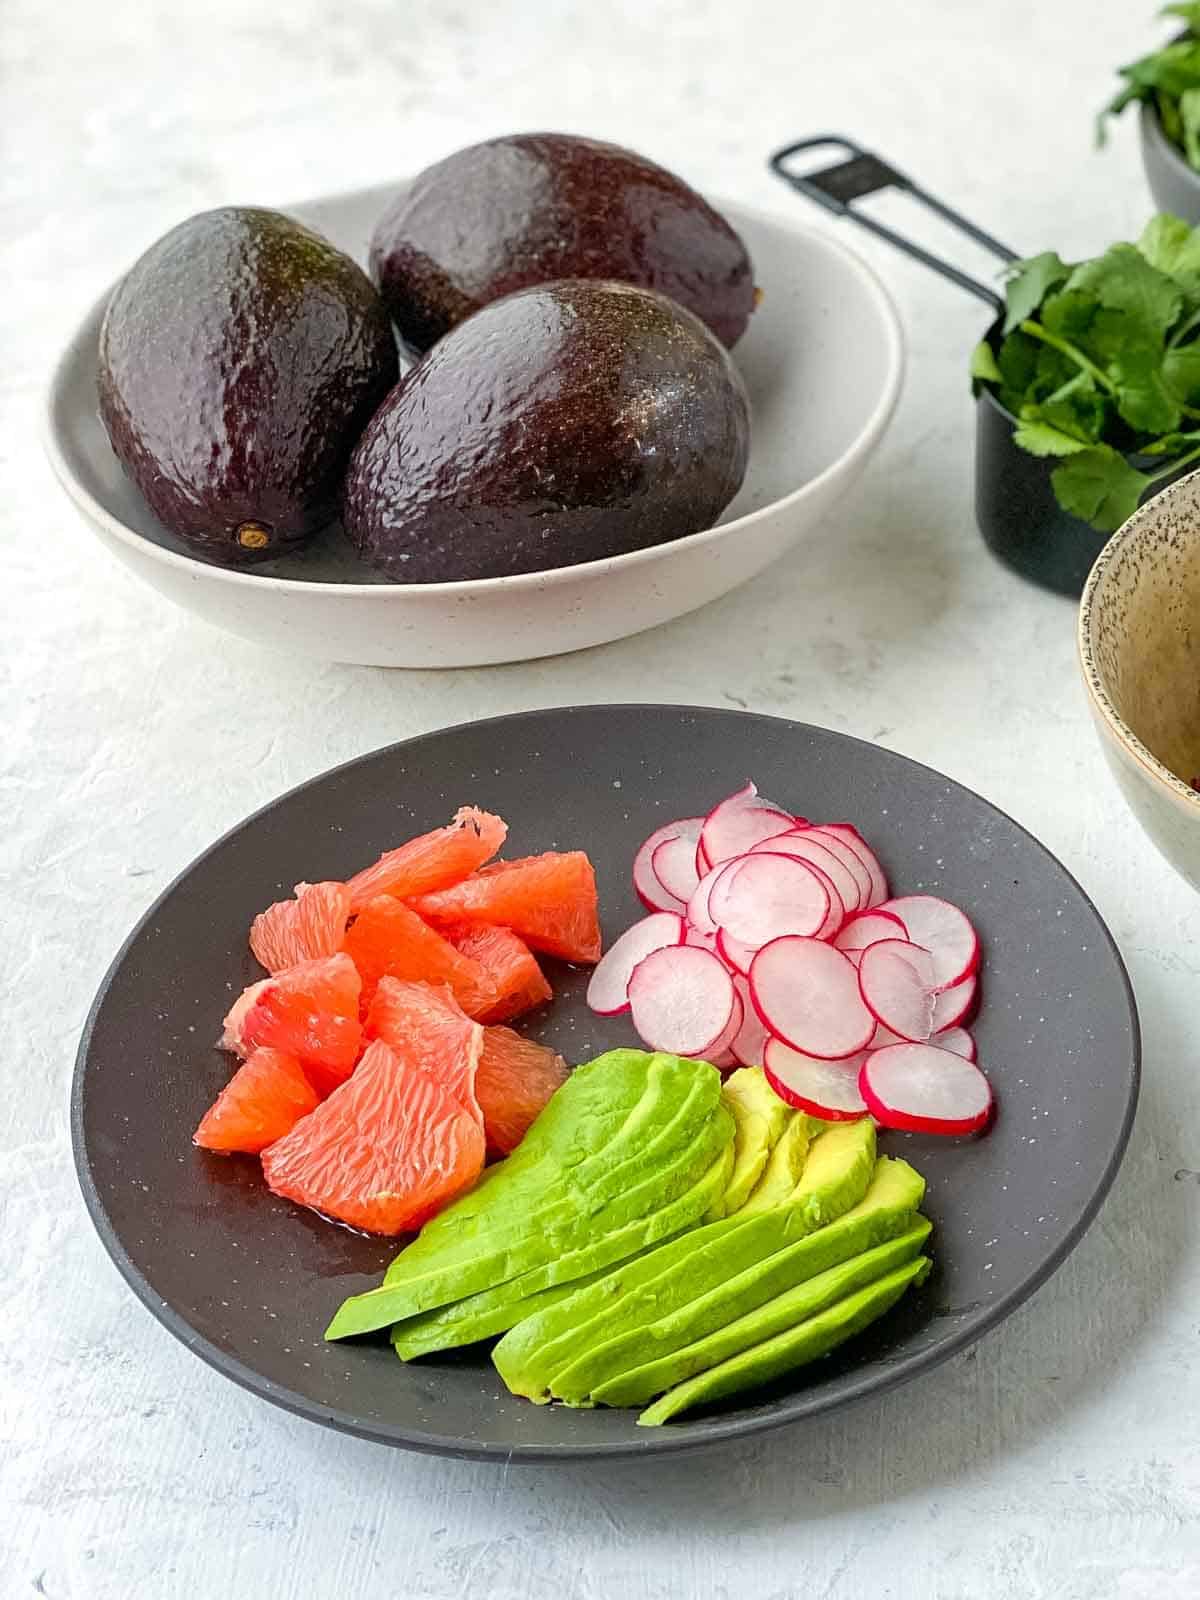 sliced avocado, radish and ruby grapefruit on a black plate with whole avocados in the background